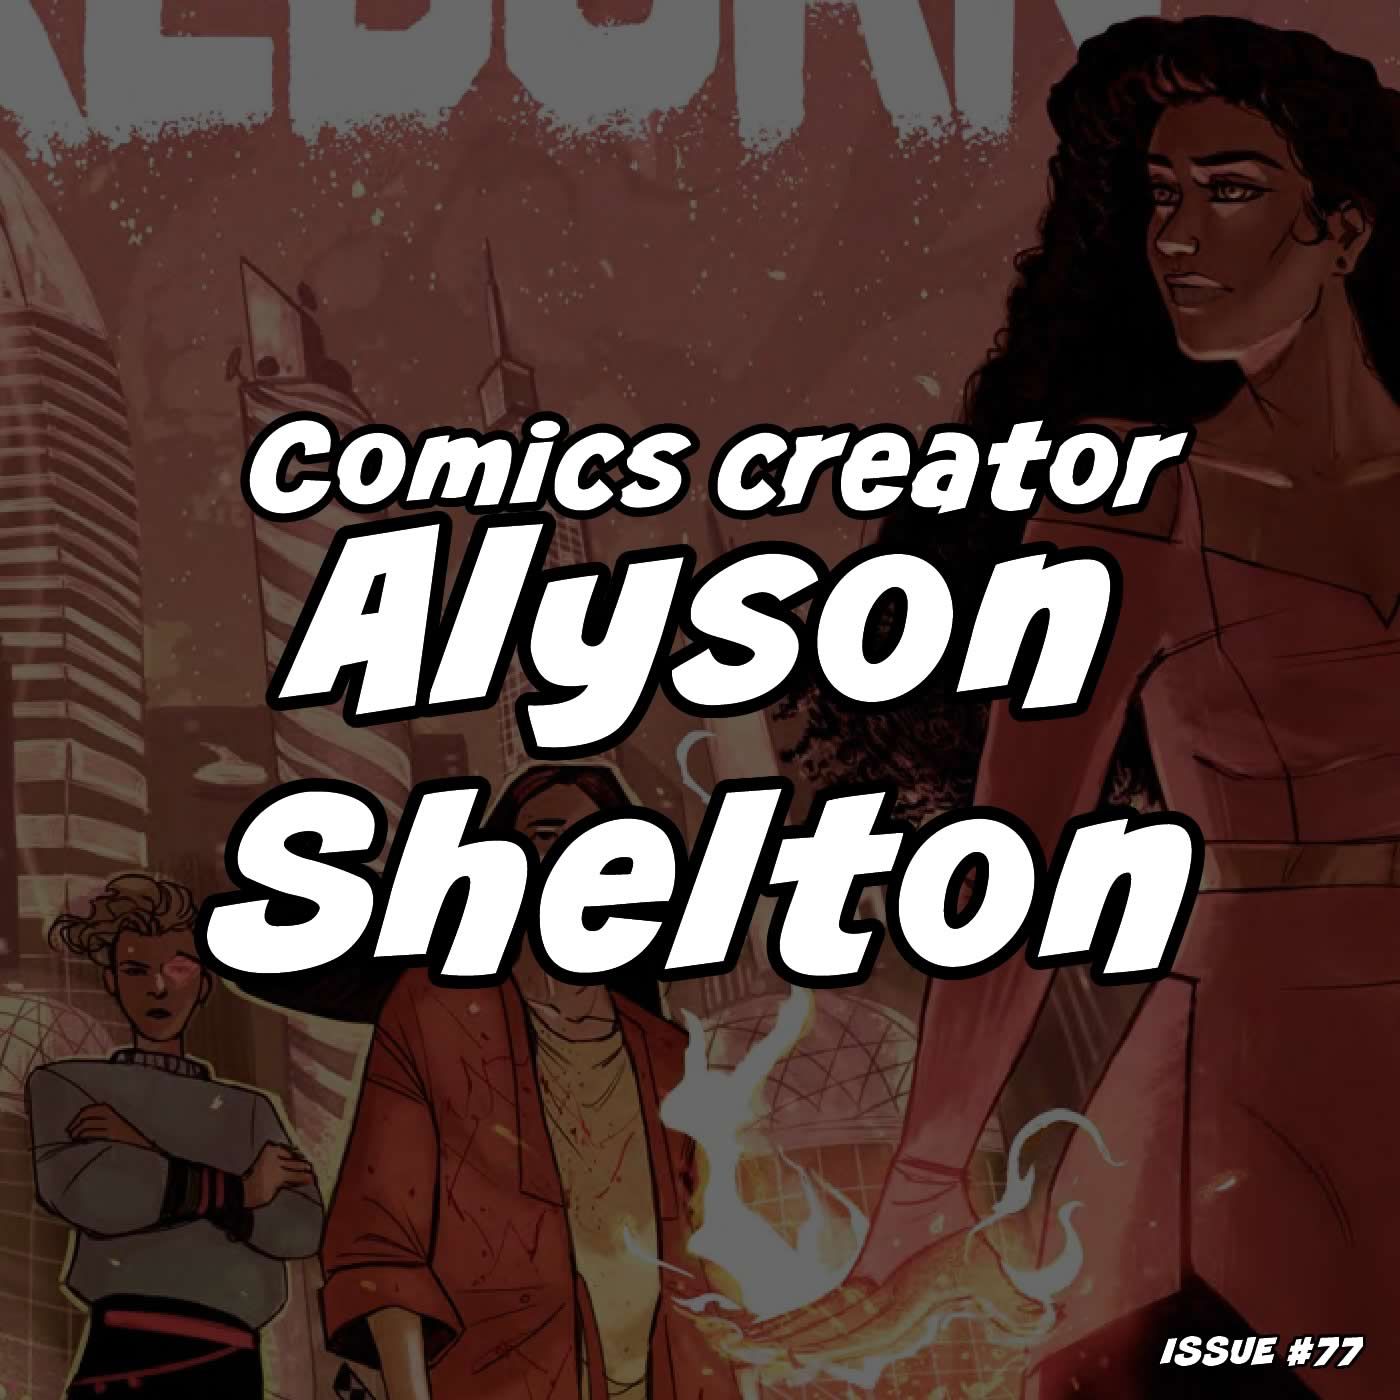 Love, rage, empowerment, and inclusion - Alyson Shelton on writing exciting stories about women